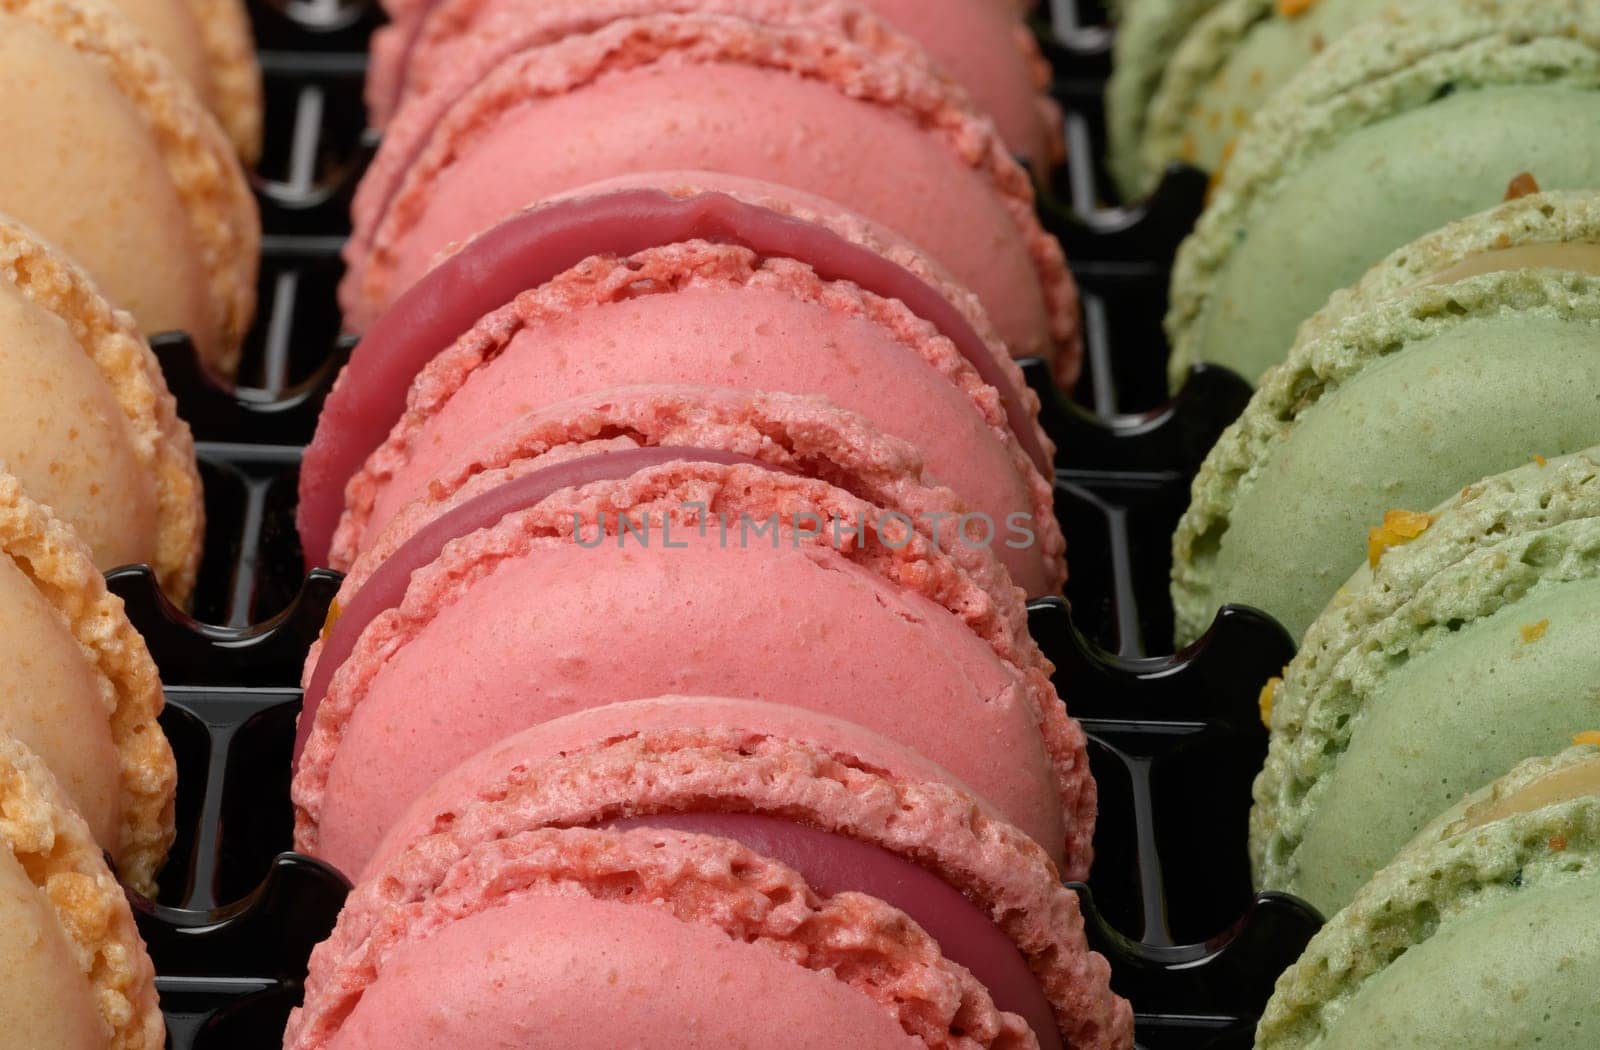 Raspberry and pistachio macarons in a plastic box, dessert. Close up